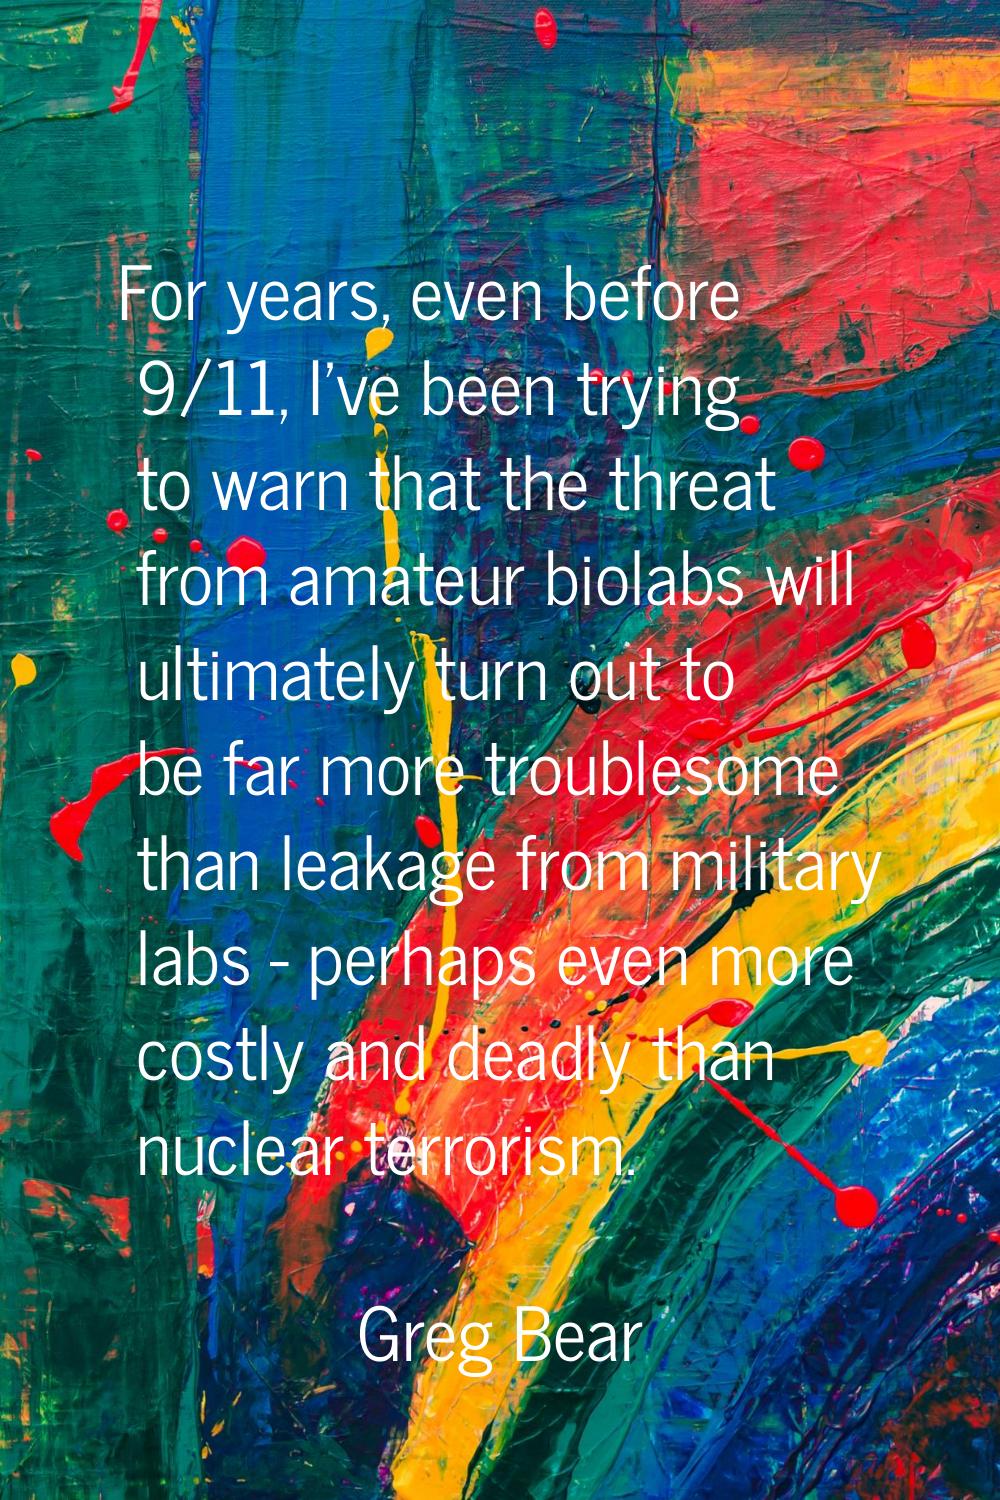 For years, even before 9/11, I've been trying to warn that the threat from amateur biolabs will ult